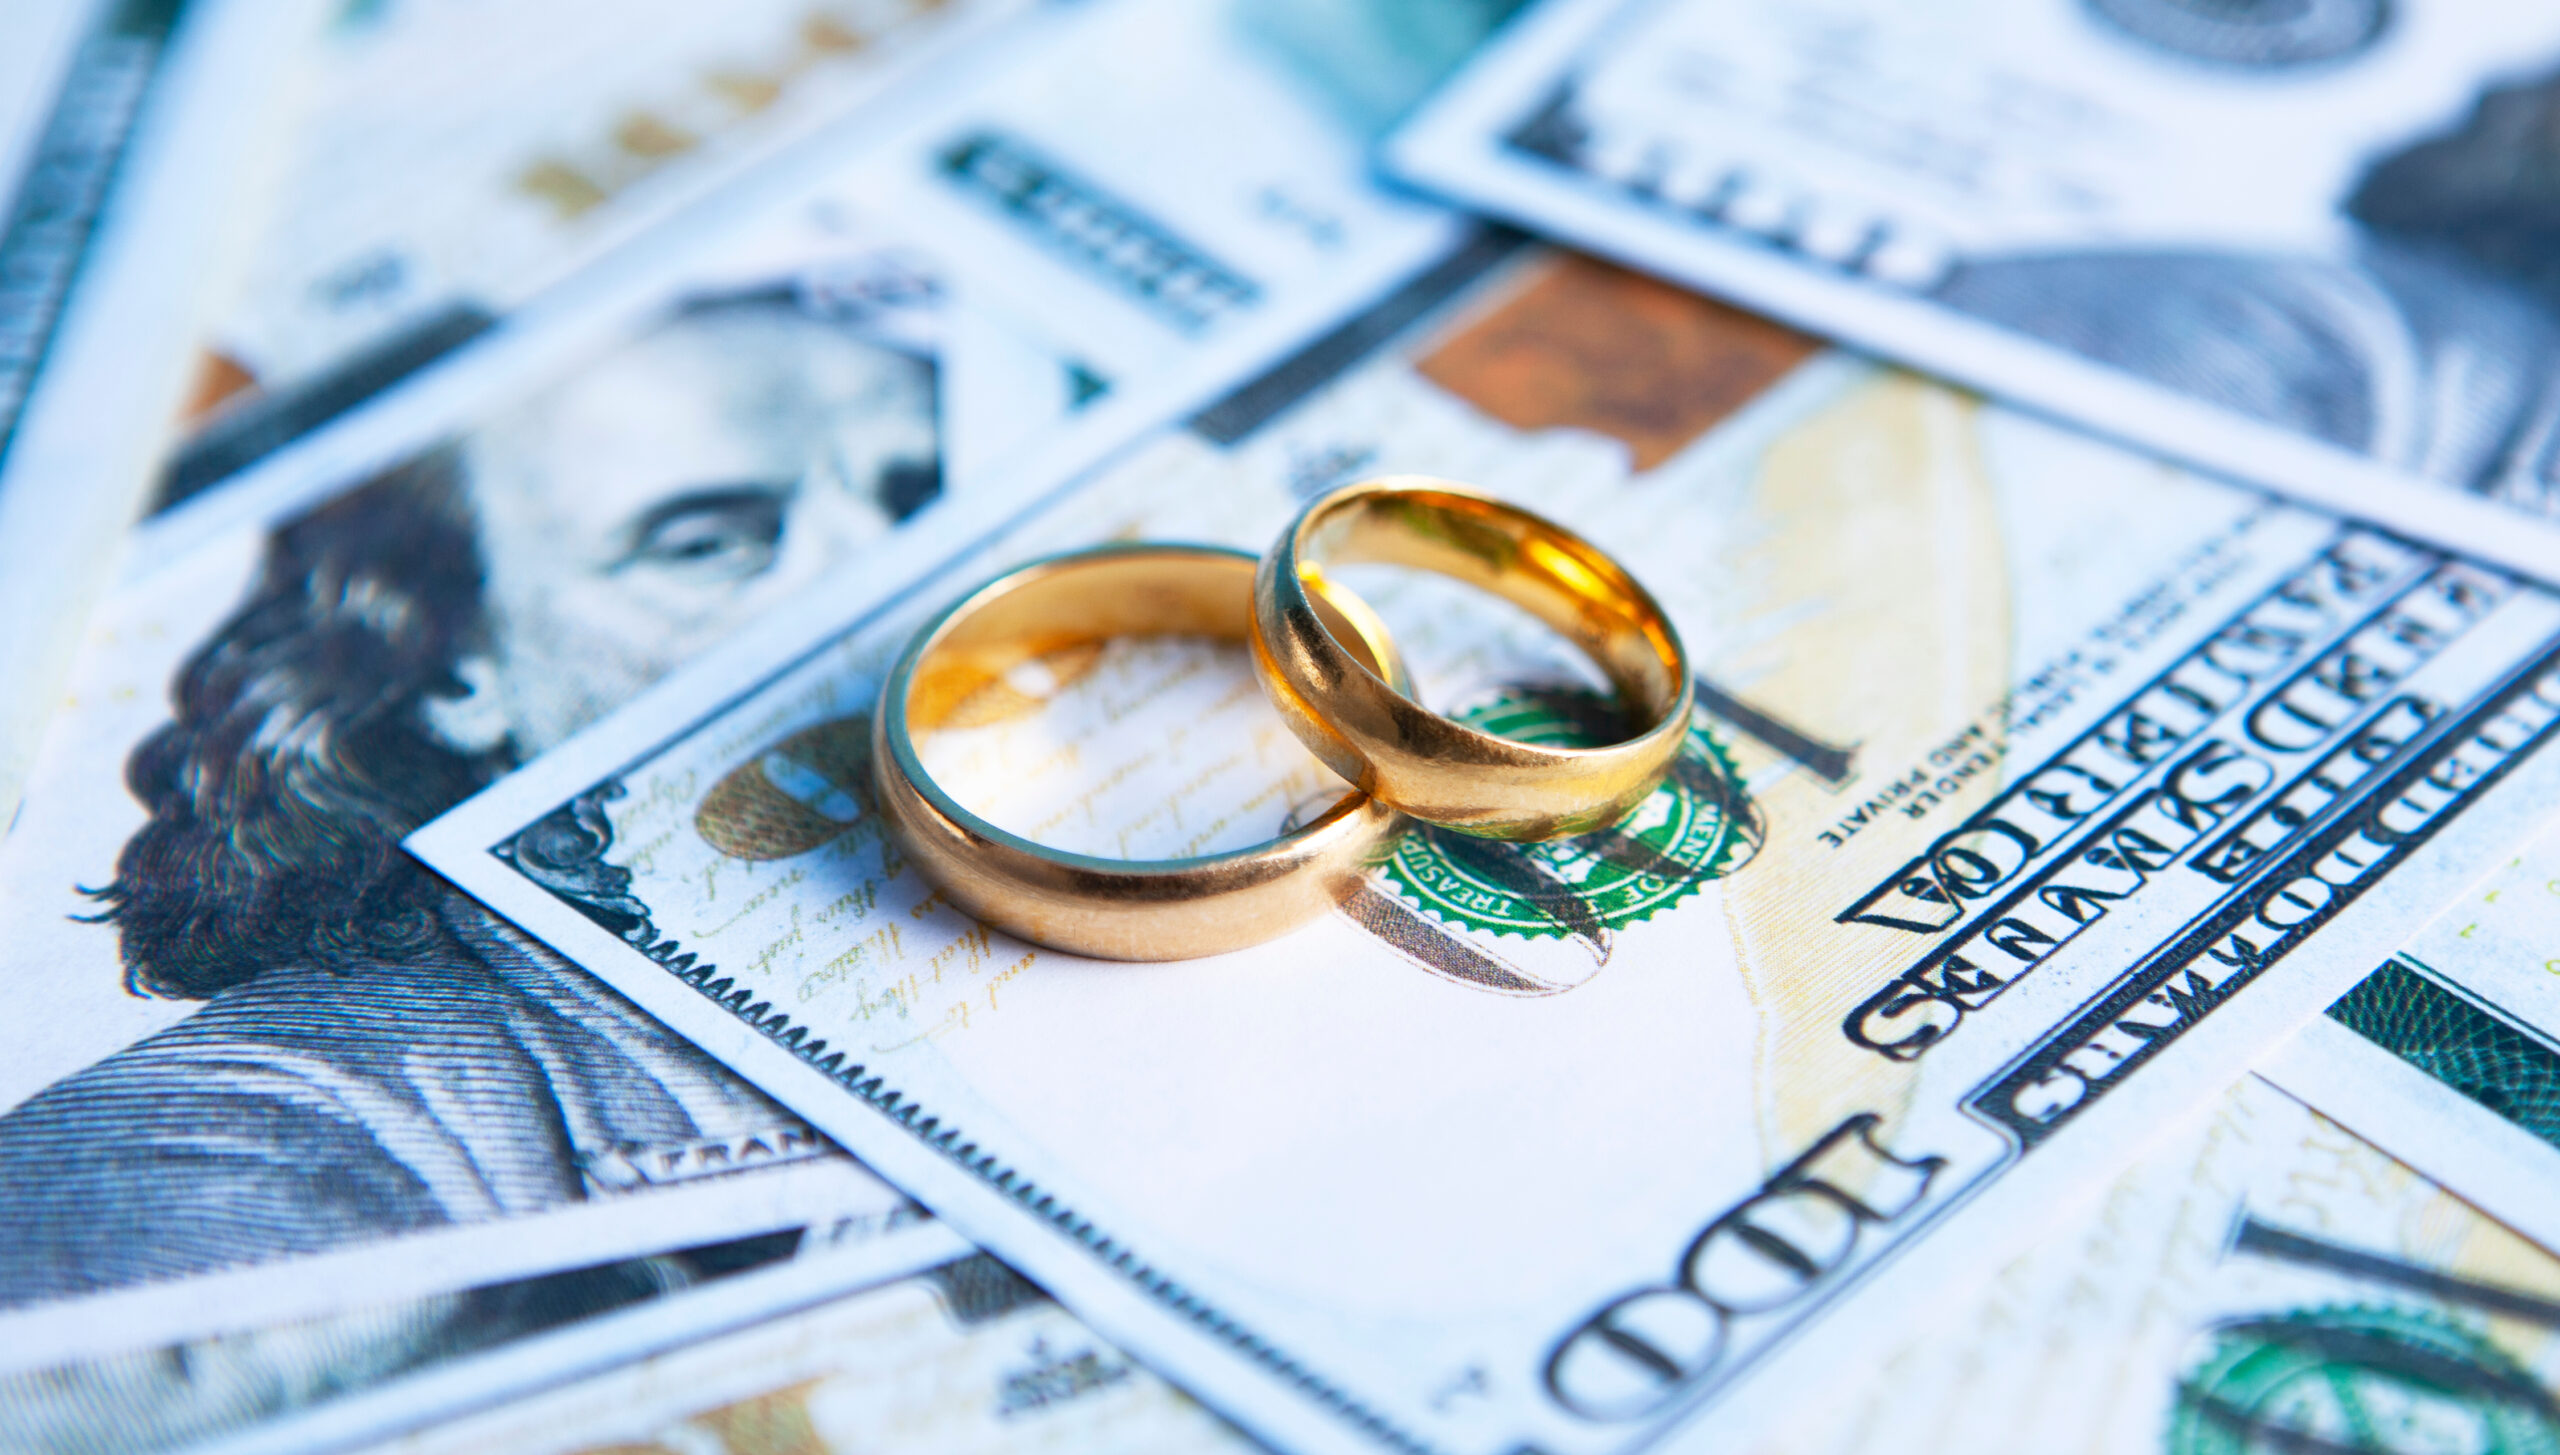 Marriage rings over dollar bills.